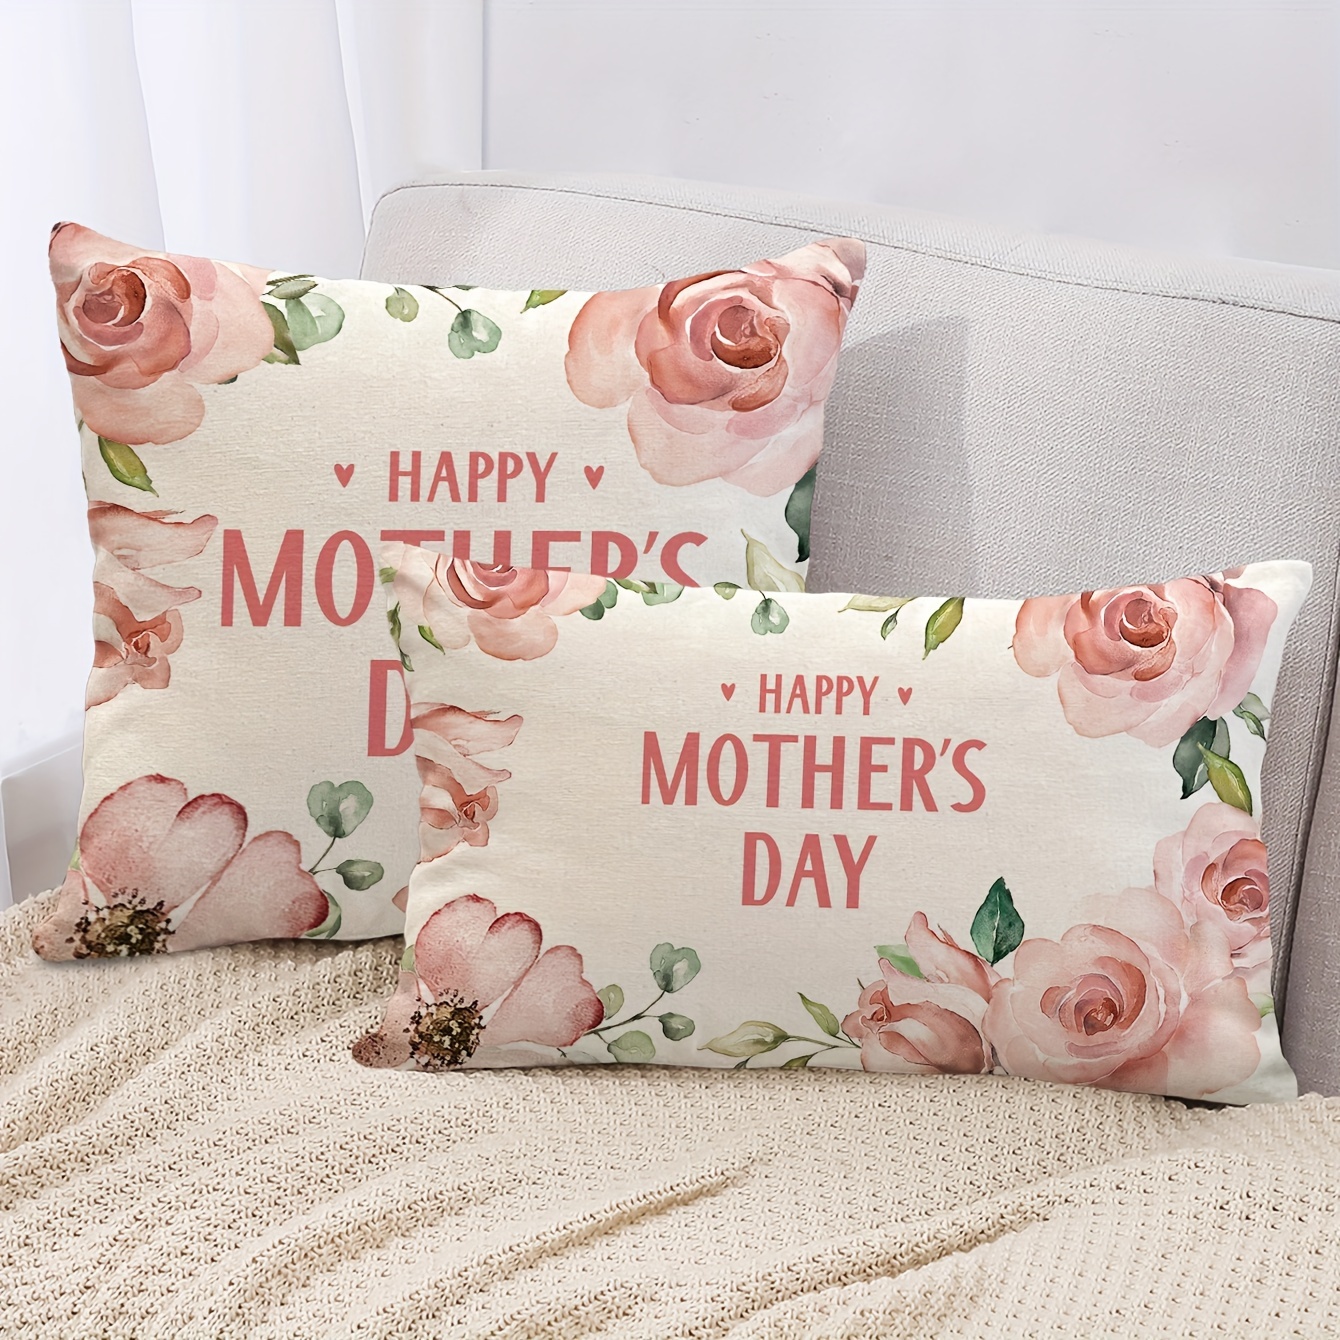 

1pc, Happy Mother's Day Floral Throw Pillow Case,mothers Gift Cushion Cover Decoration For Home,decorative Cushion Cover Home Decor For Couch Sofa Living Room Bedroom, Without Pillow Insert